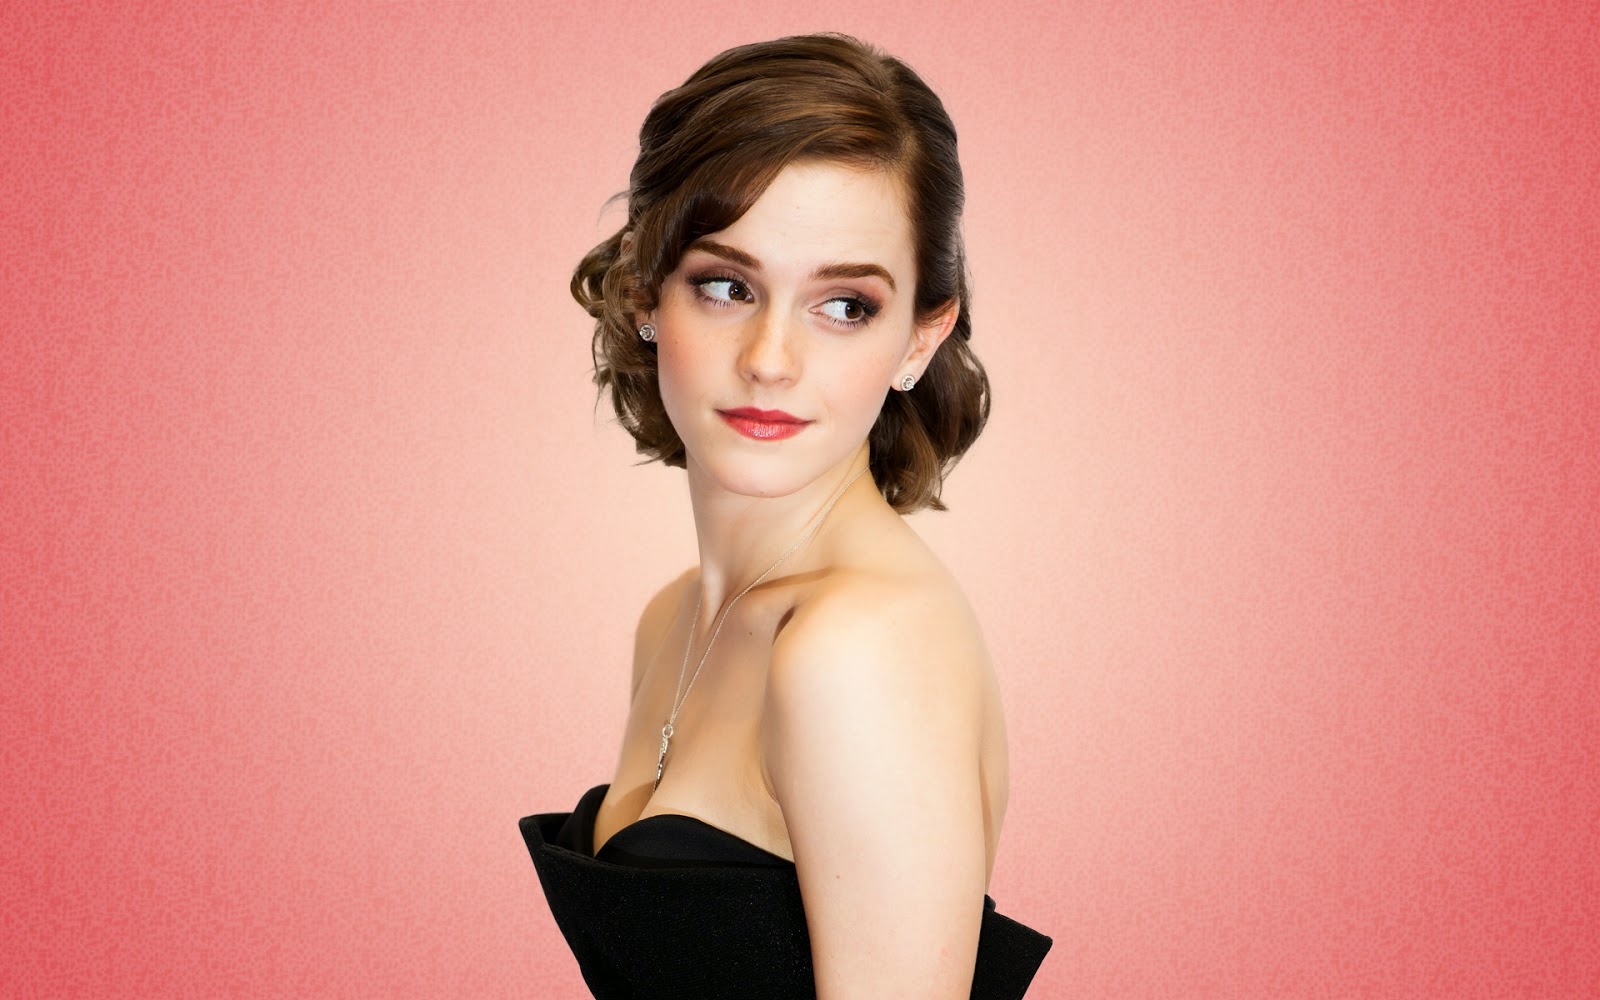 Emma Watson Cast As Belle In New Beauty and The Beast Film